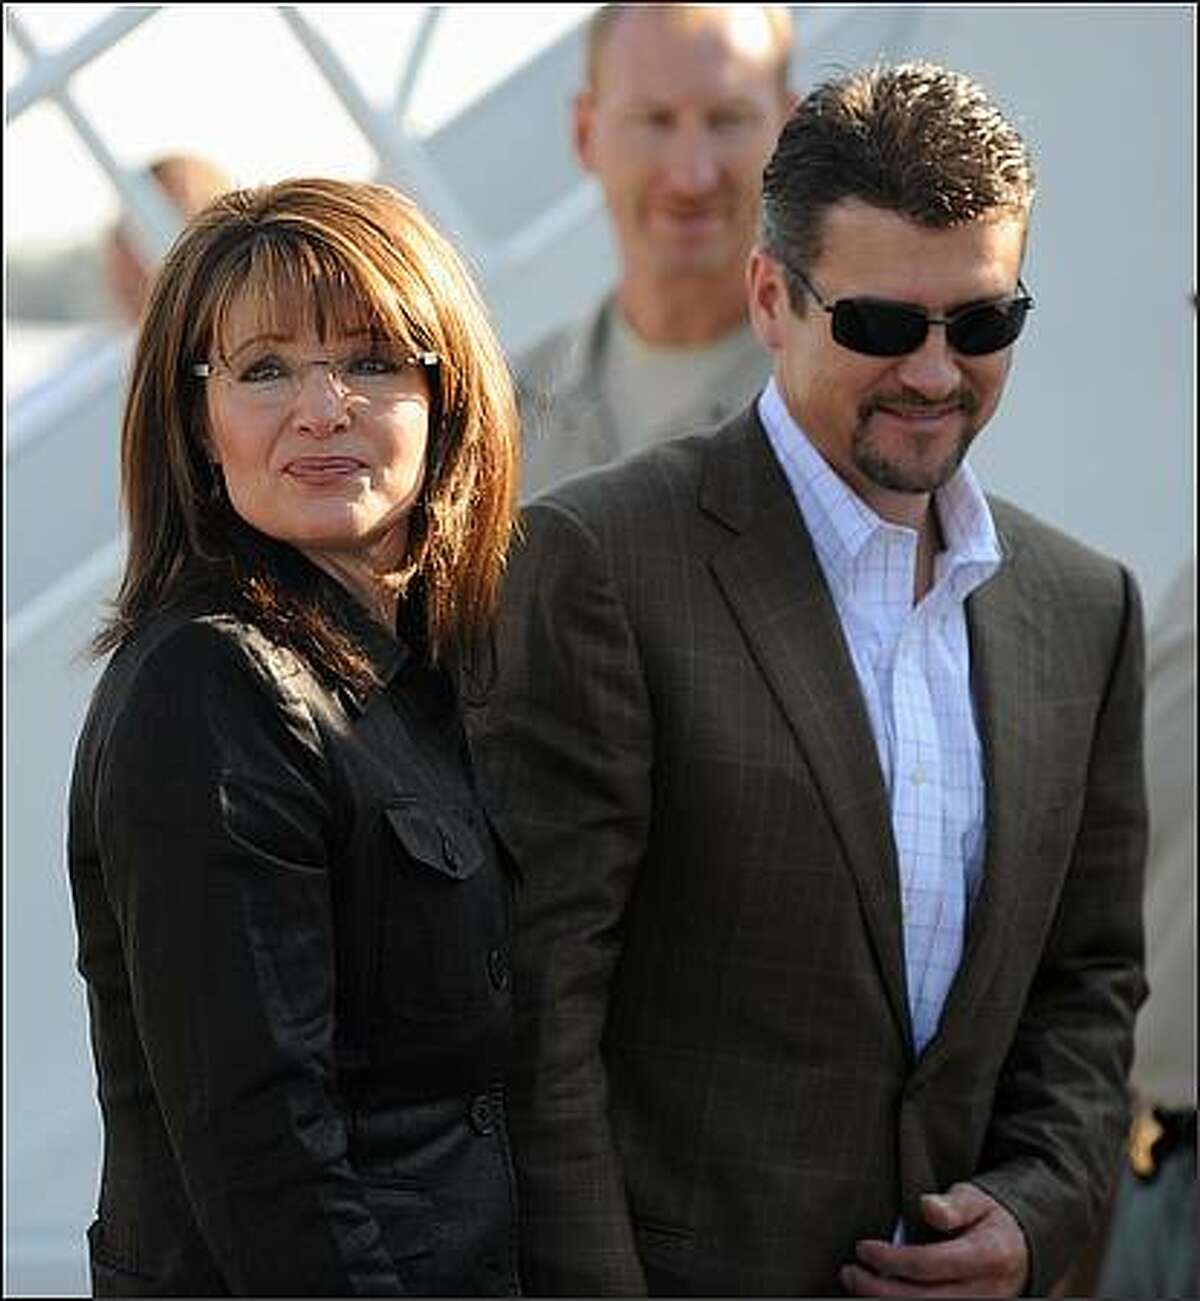 Republican vice-presidential candidate Sarah Palin arrives with and her husband Todd Palin at the Flagstaff, Arizona airport where she is boarding her campaign plane for the trip to St Louis, Missouri. Palin will face-off with her Democratic counterpart Joe Biden in the Vice-Presidential Debate later on October 02, 2008. (ROBYN BECK/AFP/Getty Images)